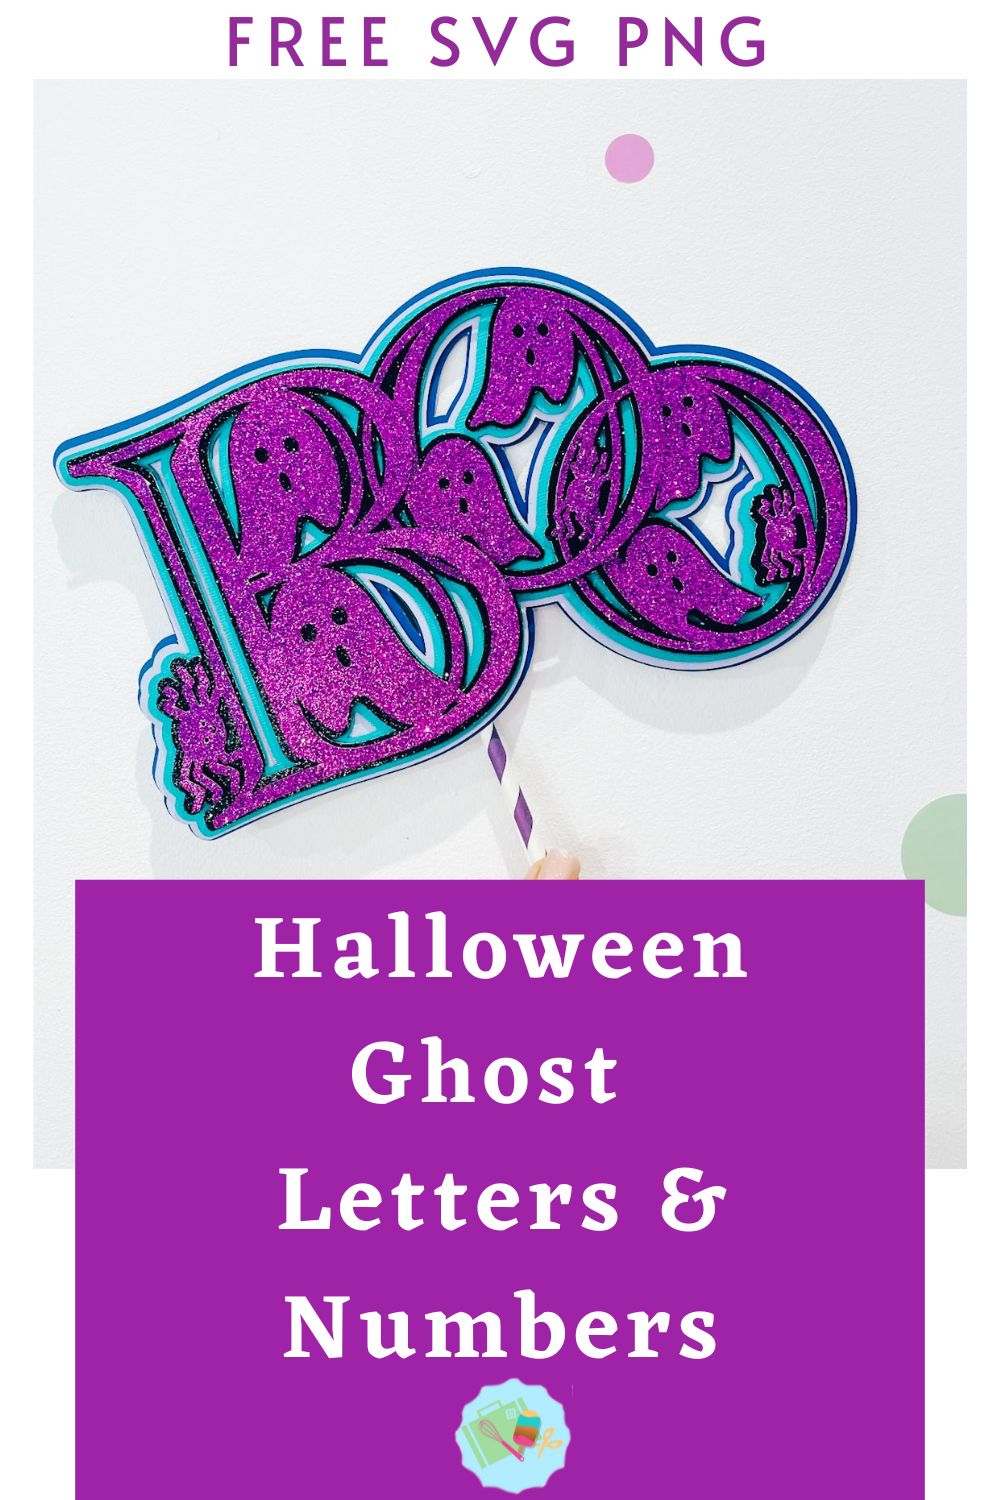 Free Ghost Halloween Letters and Numbers SVG, PNG for Cricut, Glowforge and Silhouette